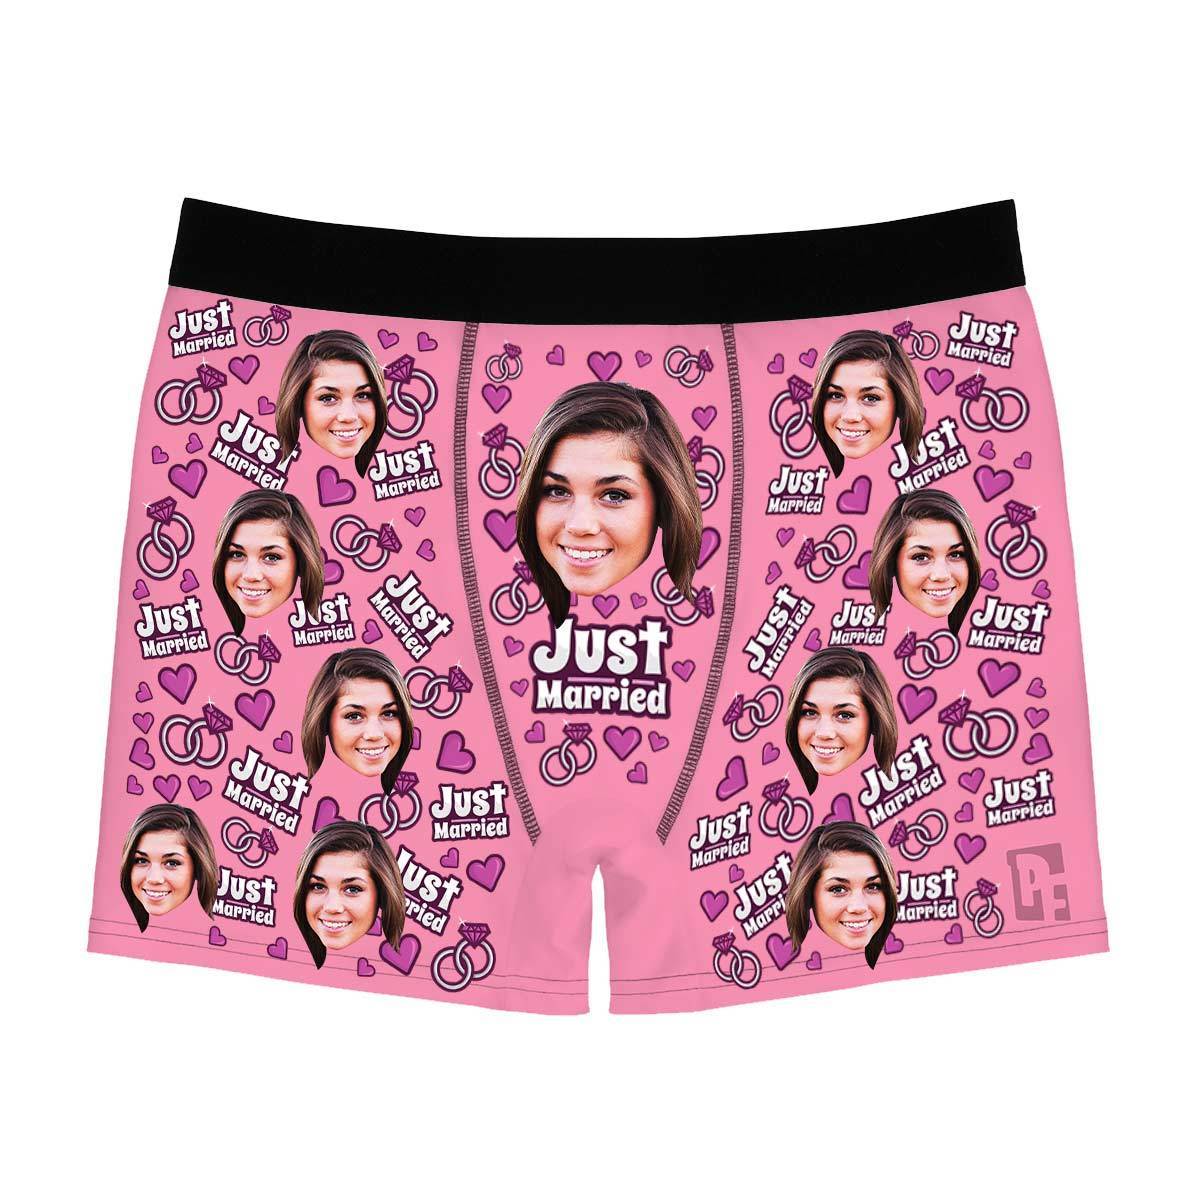 Pink Just married men's boxer briefs personalized with photo printed on them